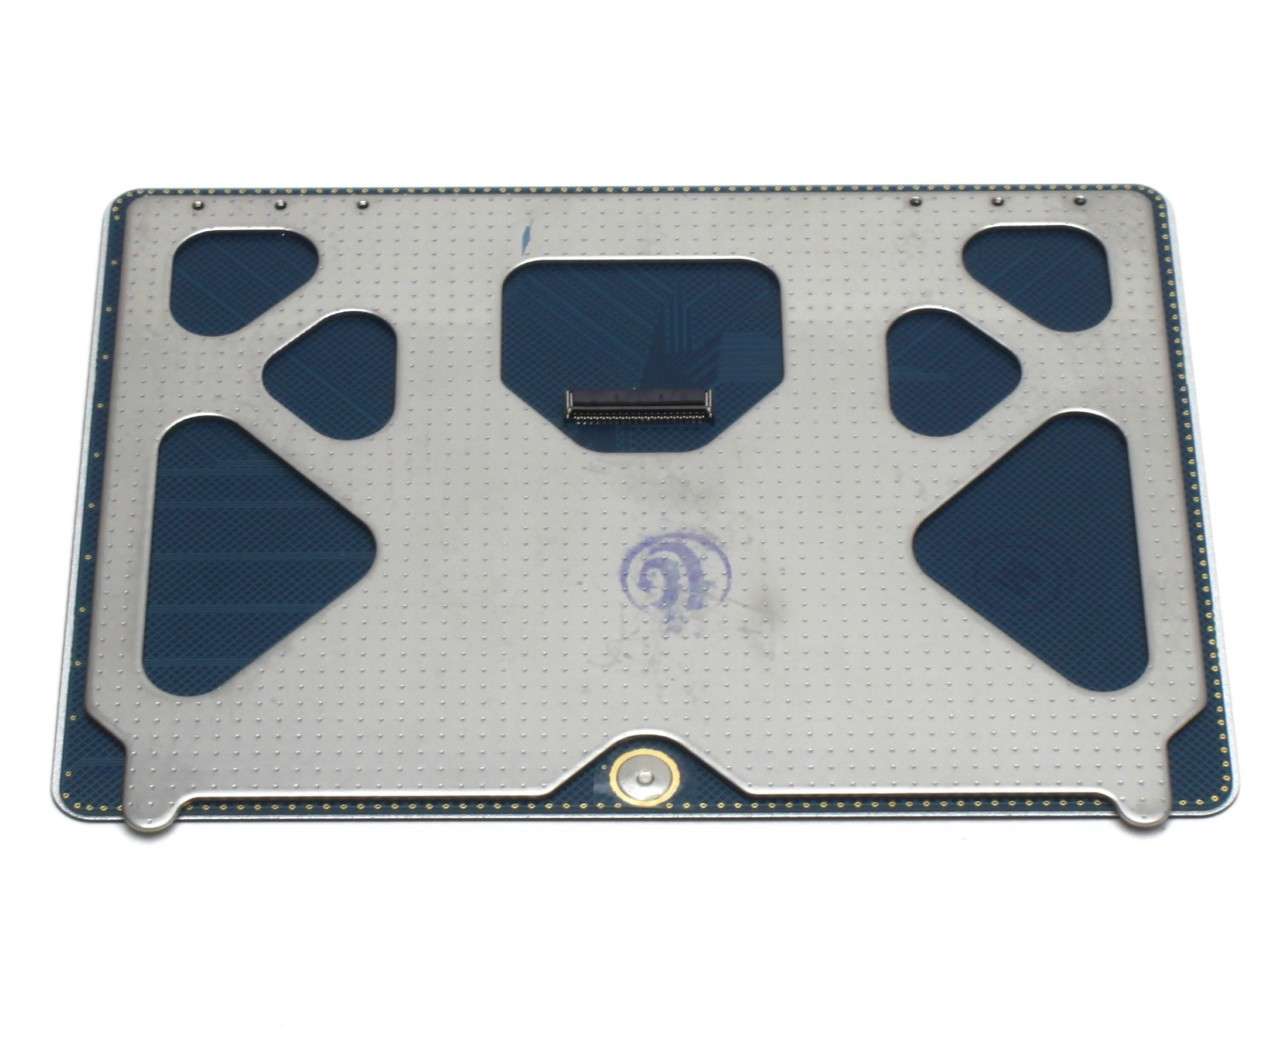 Touchpad Apple Macbook Air 13 A1369 Mid 2011 Trackpad 2011 2011